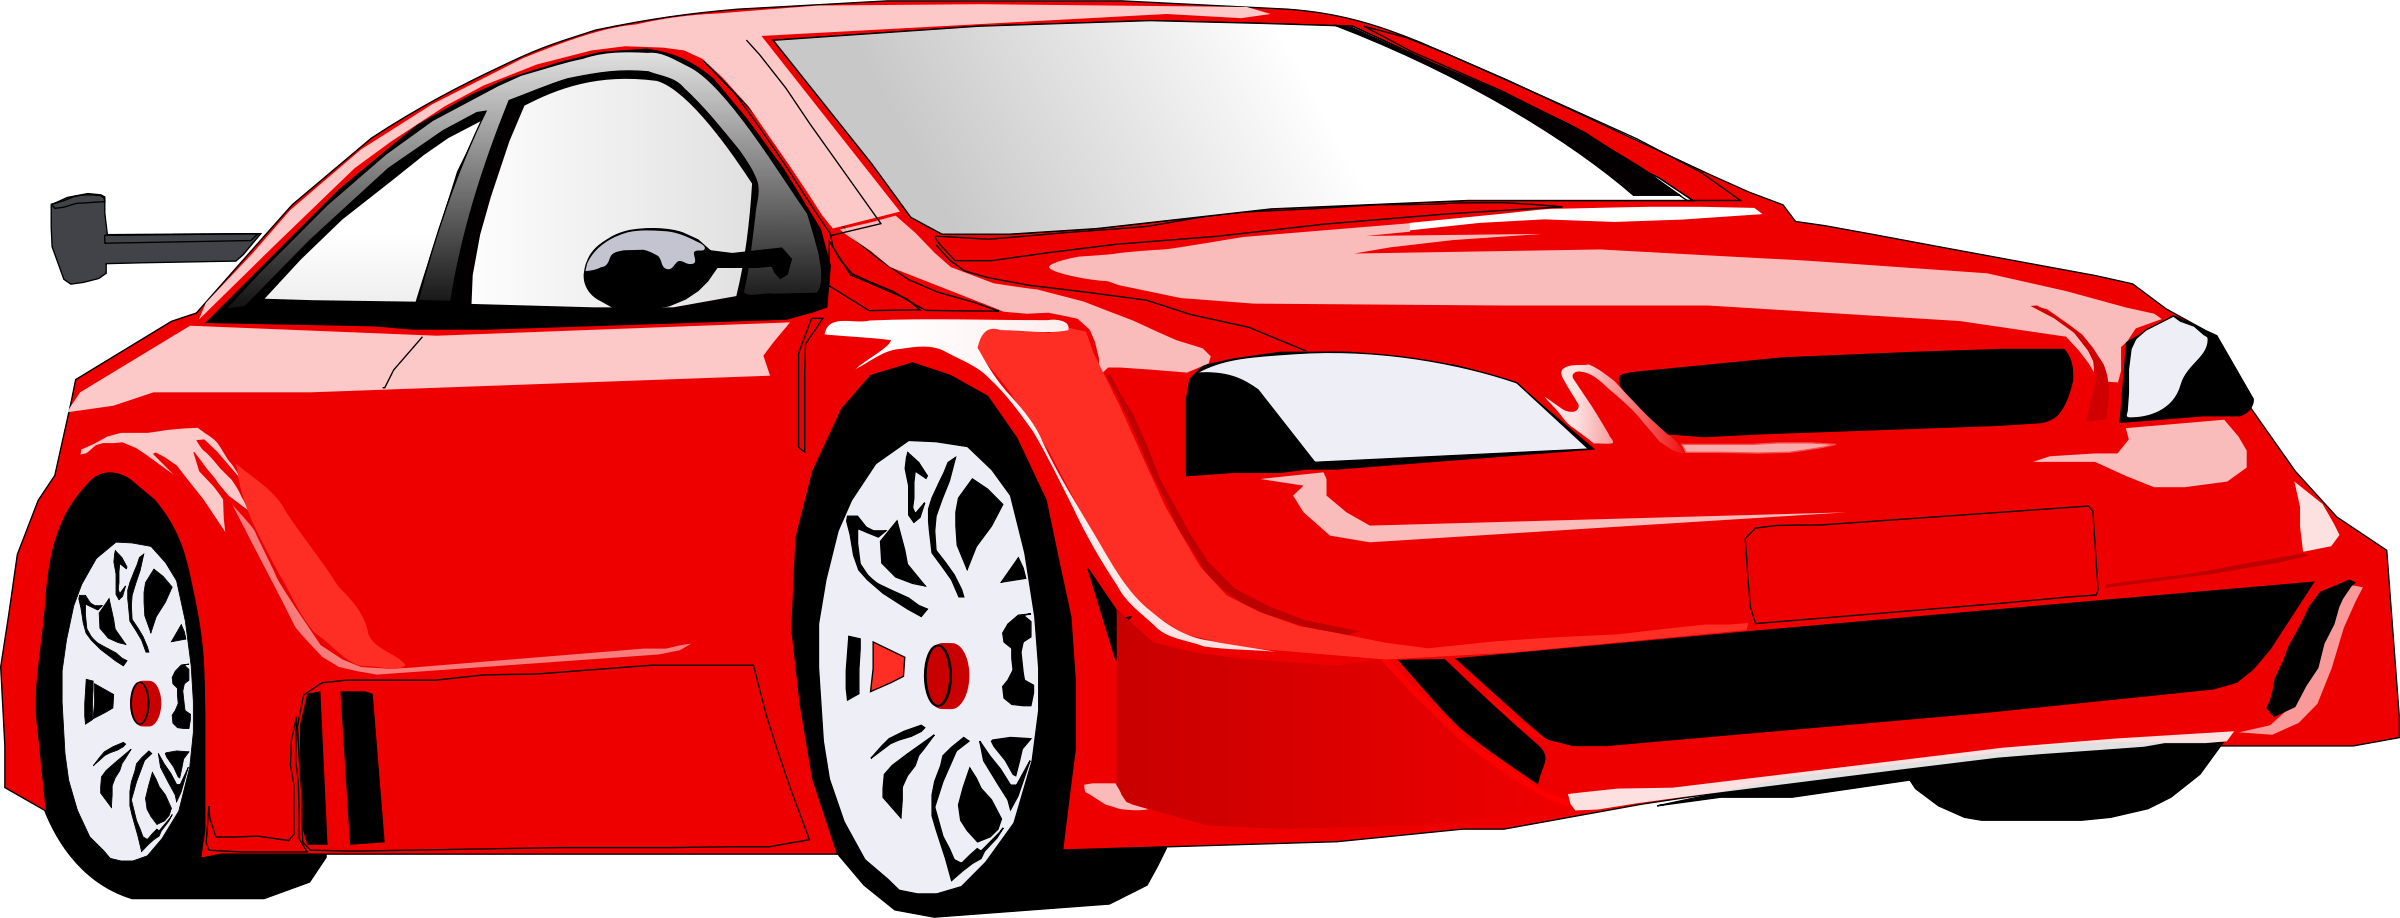 Red fast car clipart